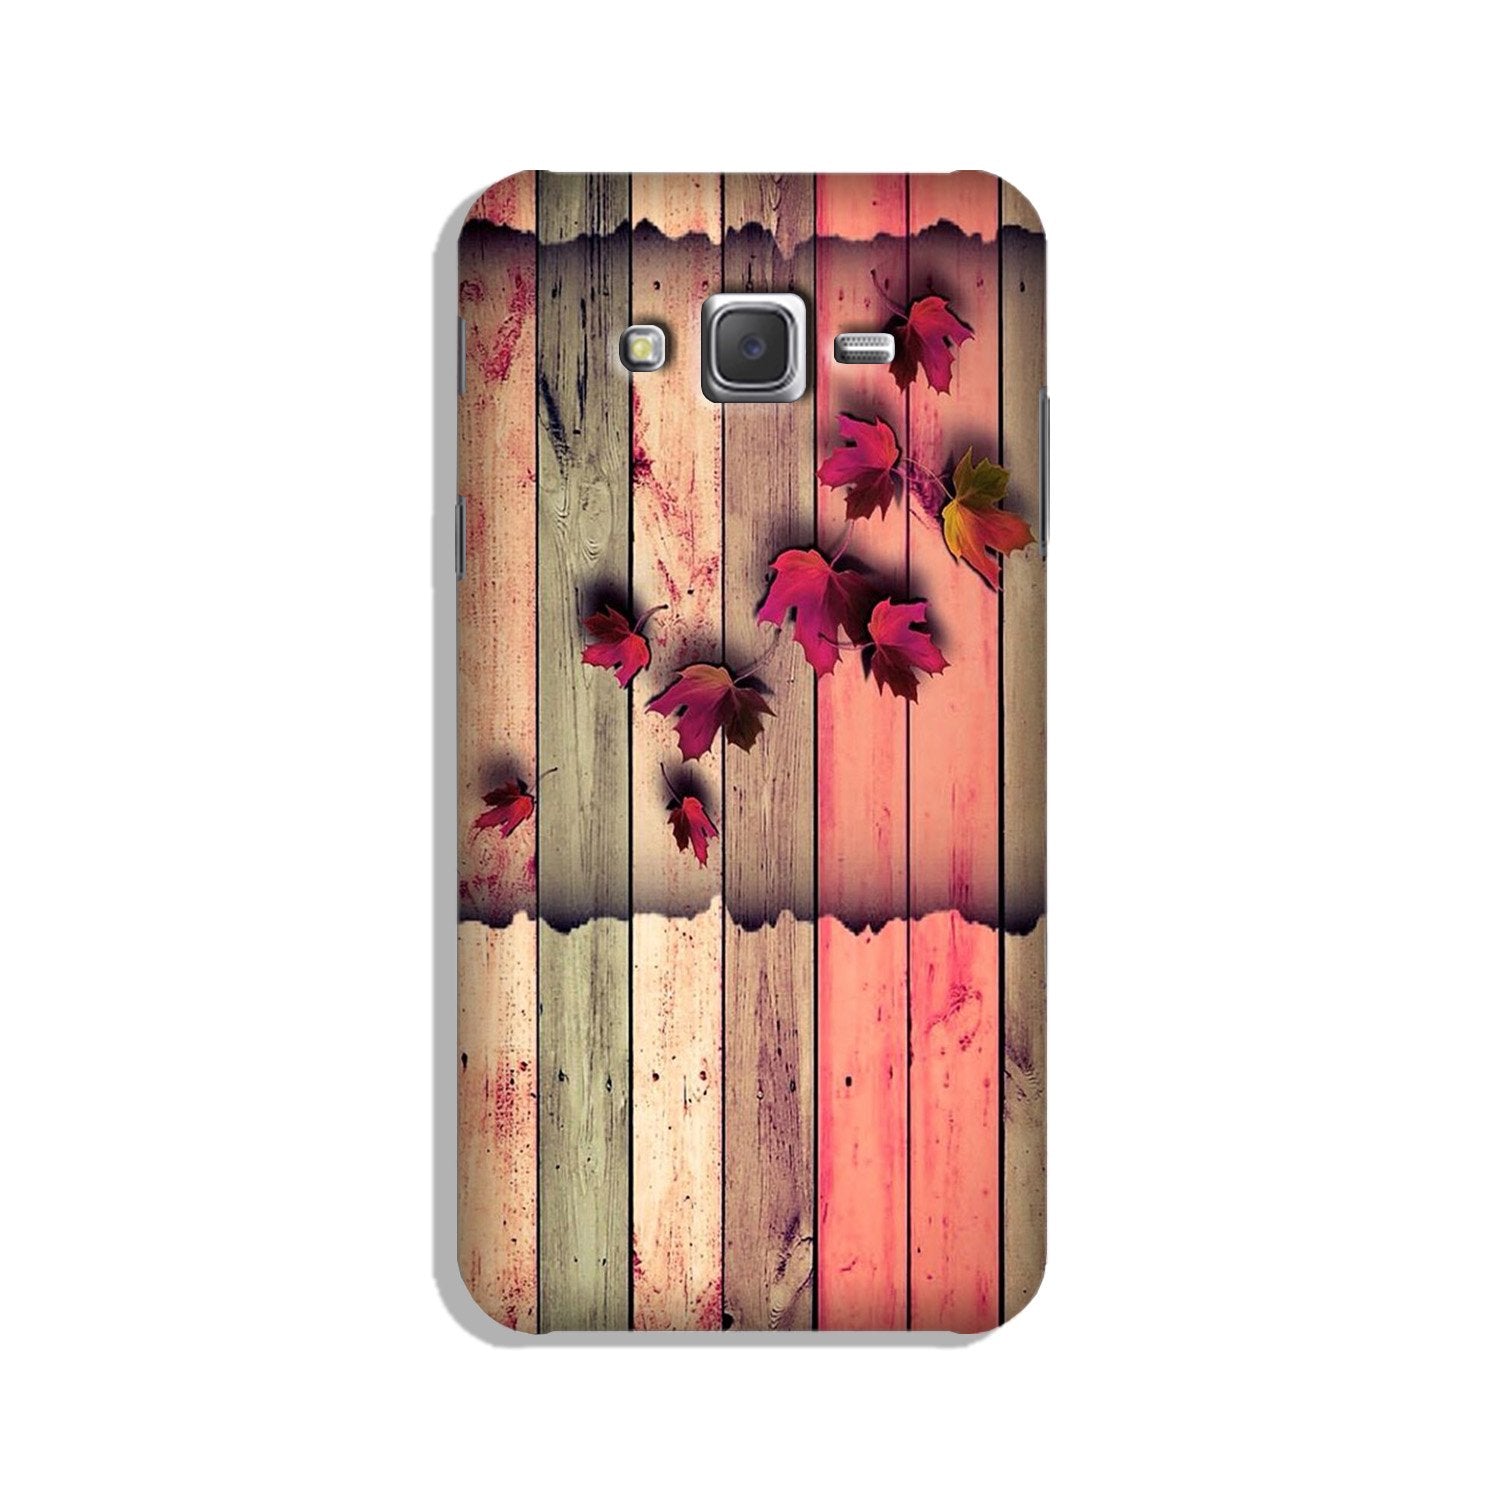 Wooden look2 Case for Galaxy J2 (2015)